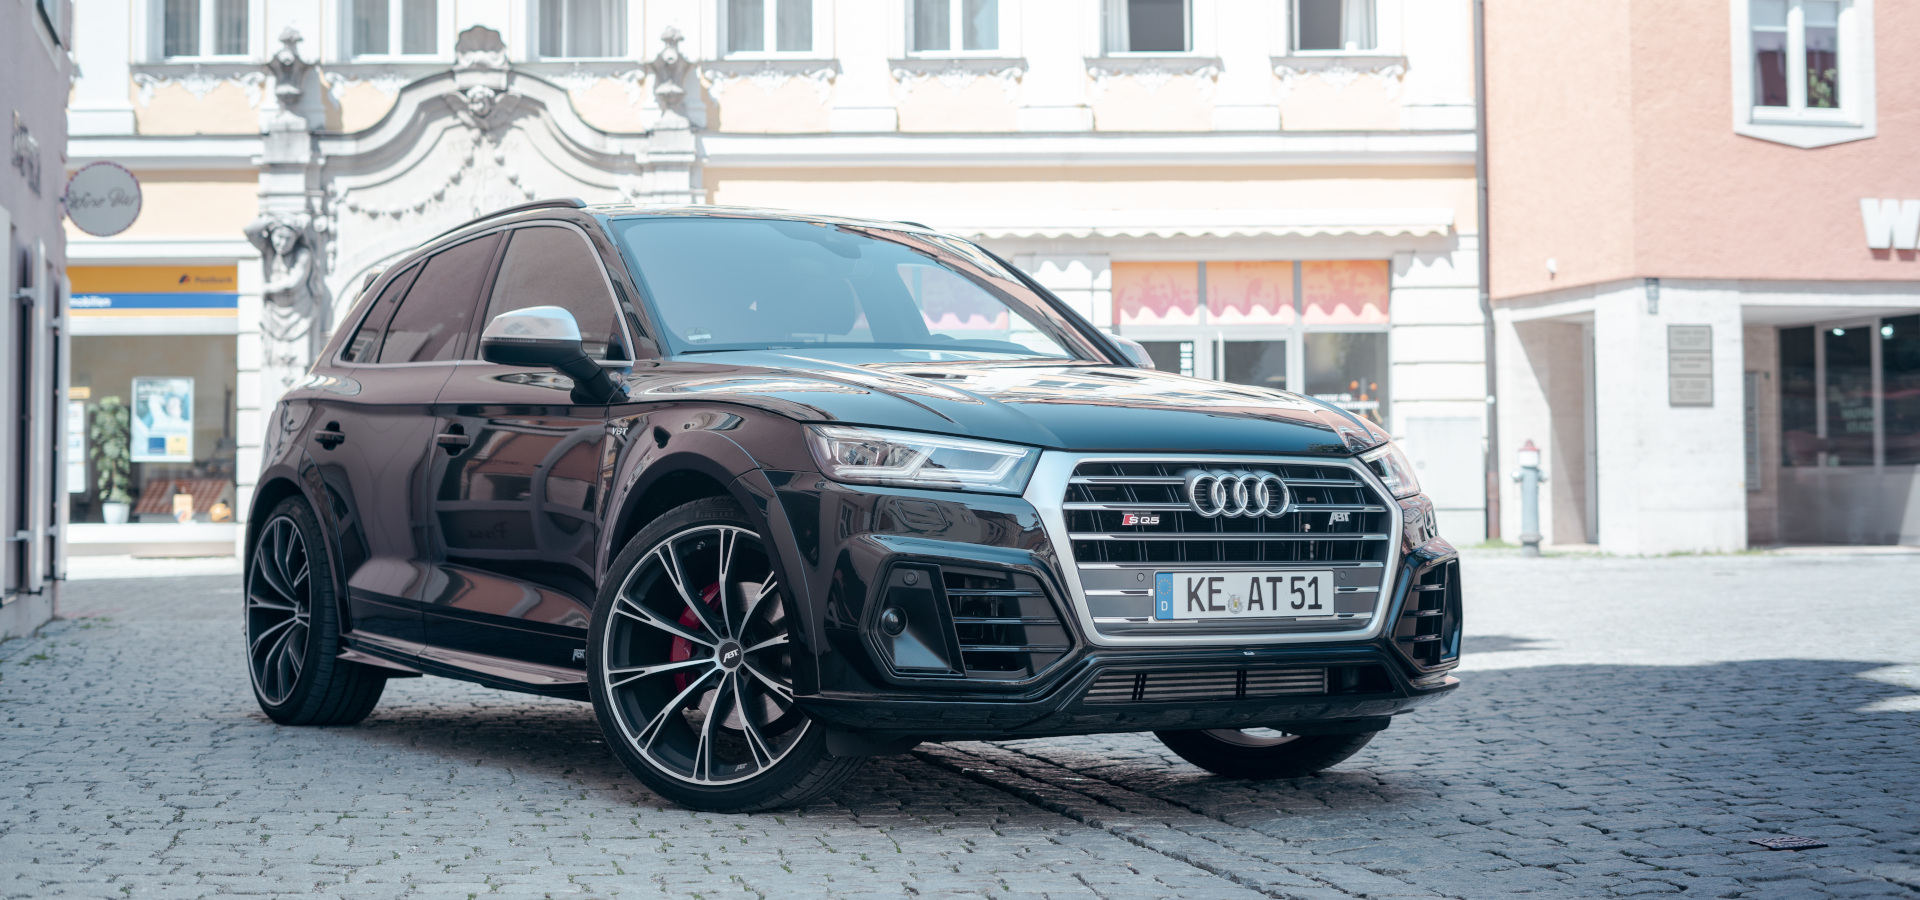 ABT body kit for 2018 Audi SQ5 and Q5 - Audi Tuning, VW Tuning, Chiptuning  von ABT Sportsline.